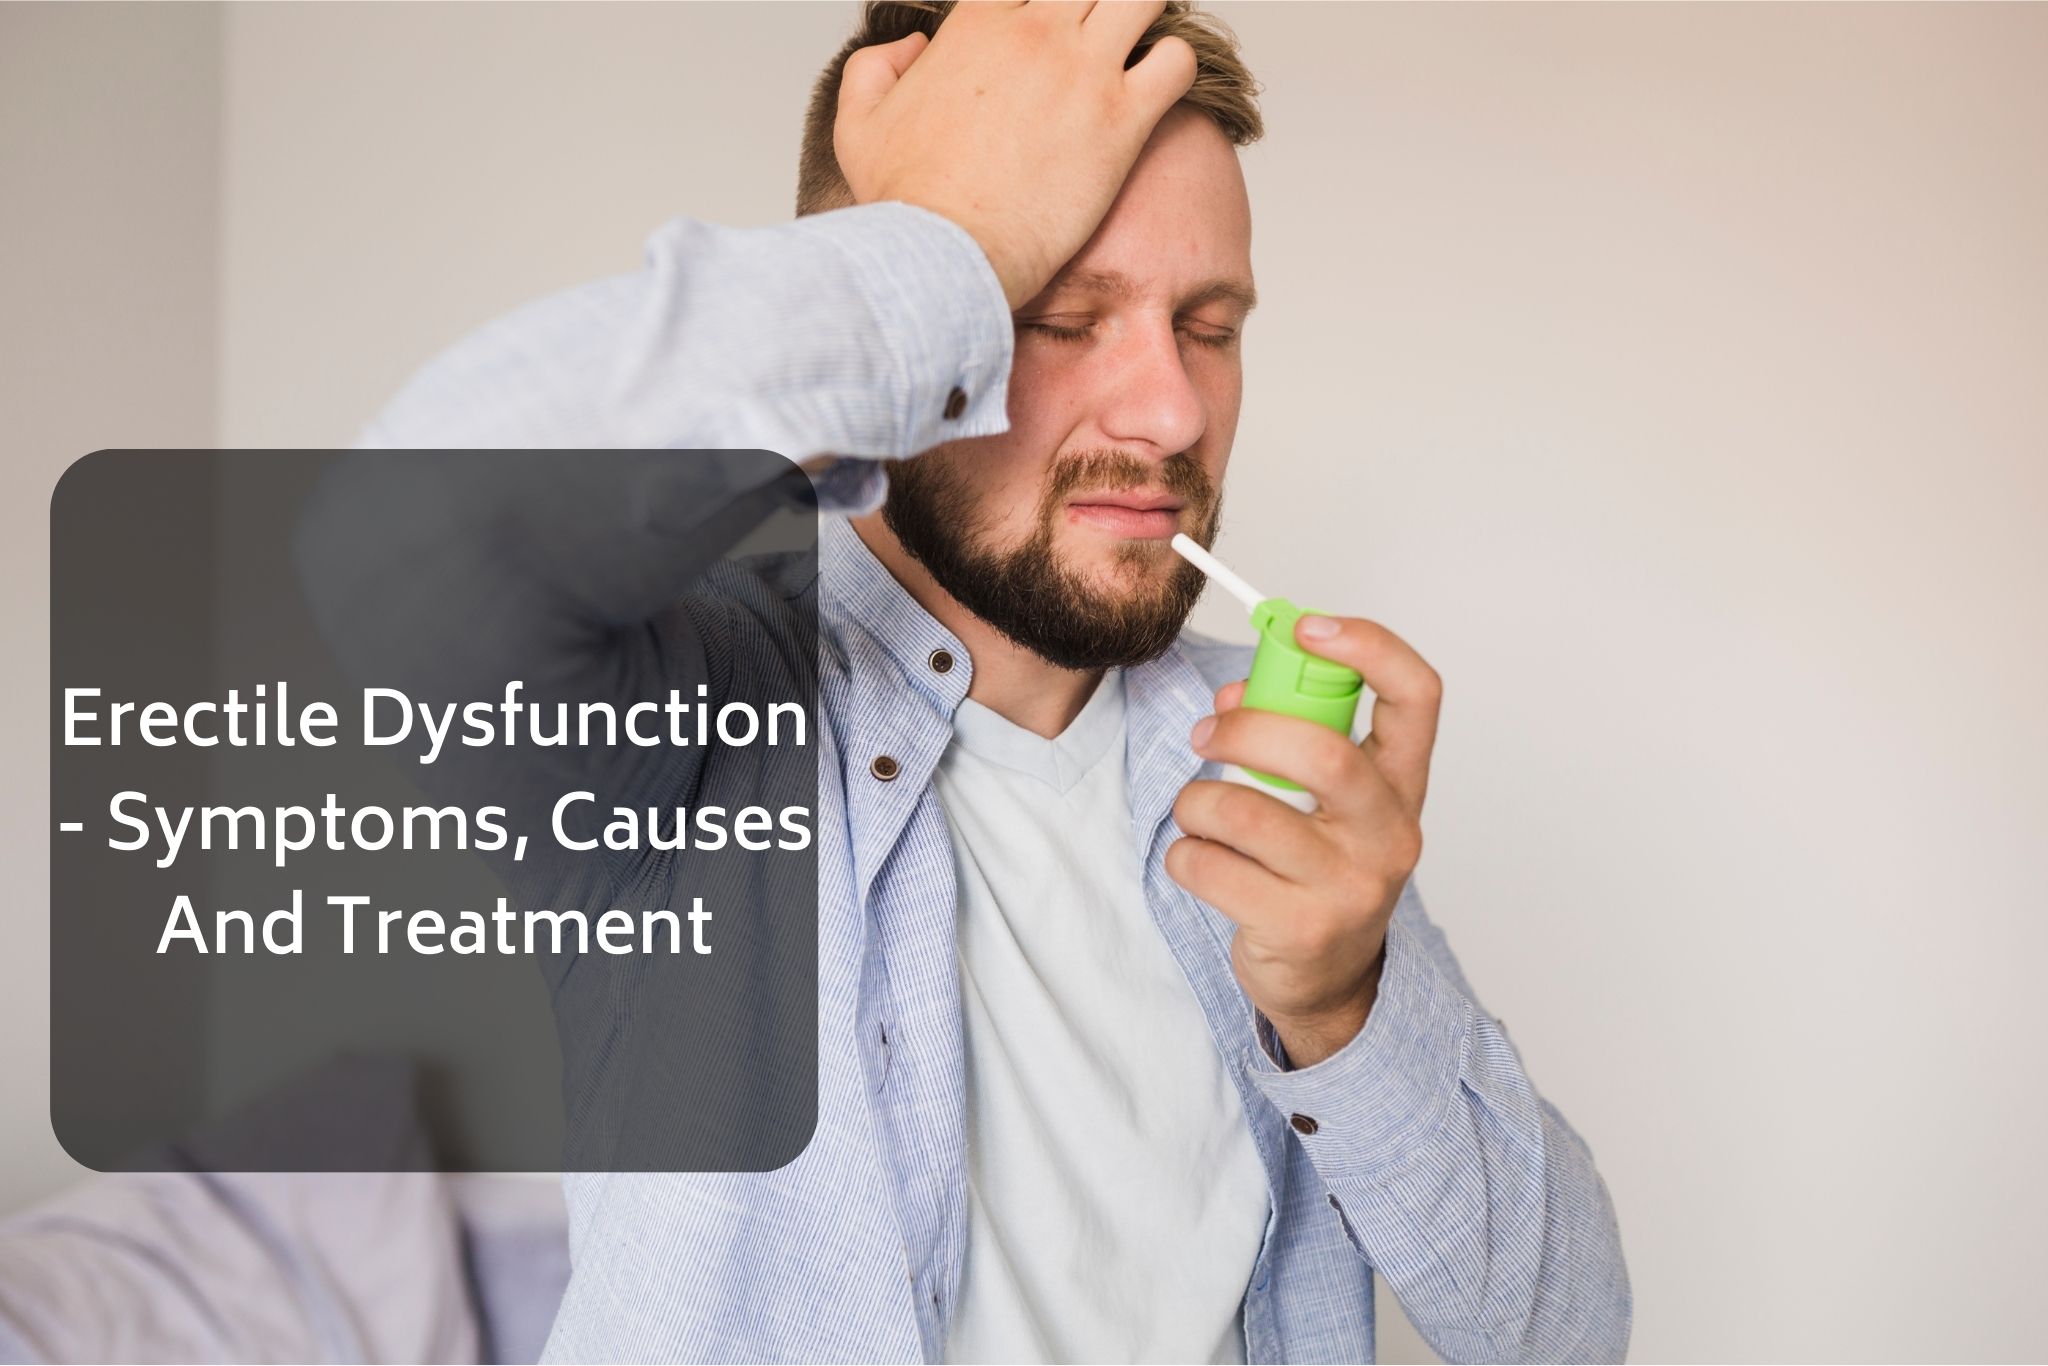 Erectile Dysfunction - Symptoms, Causes And Treatment